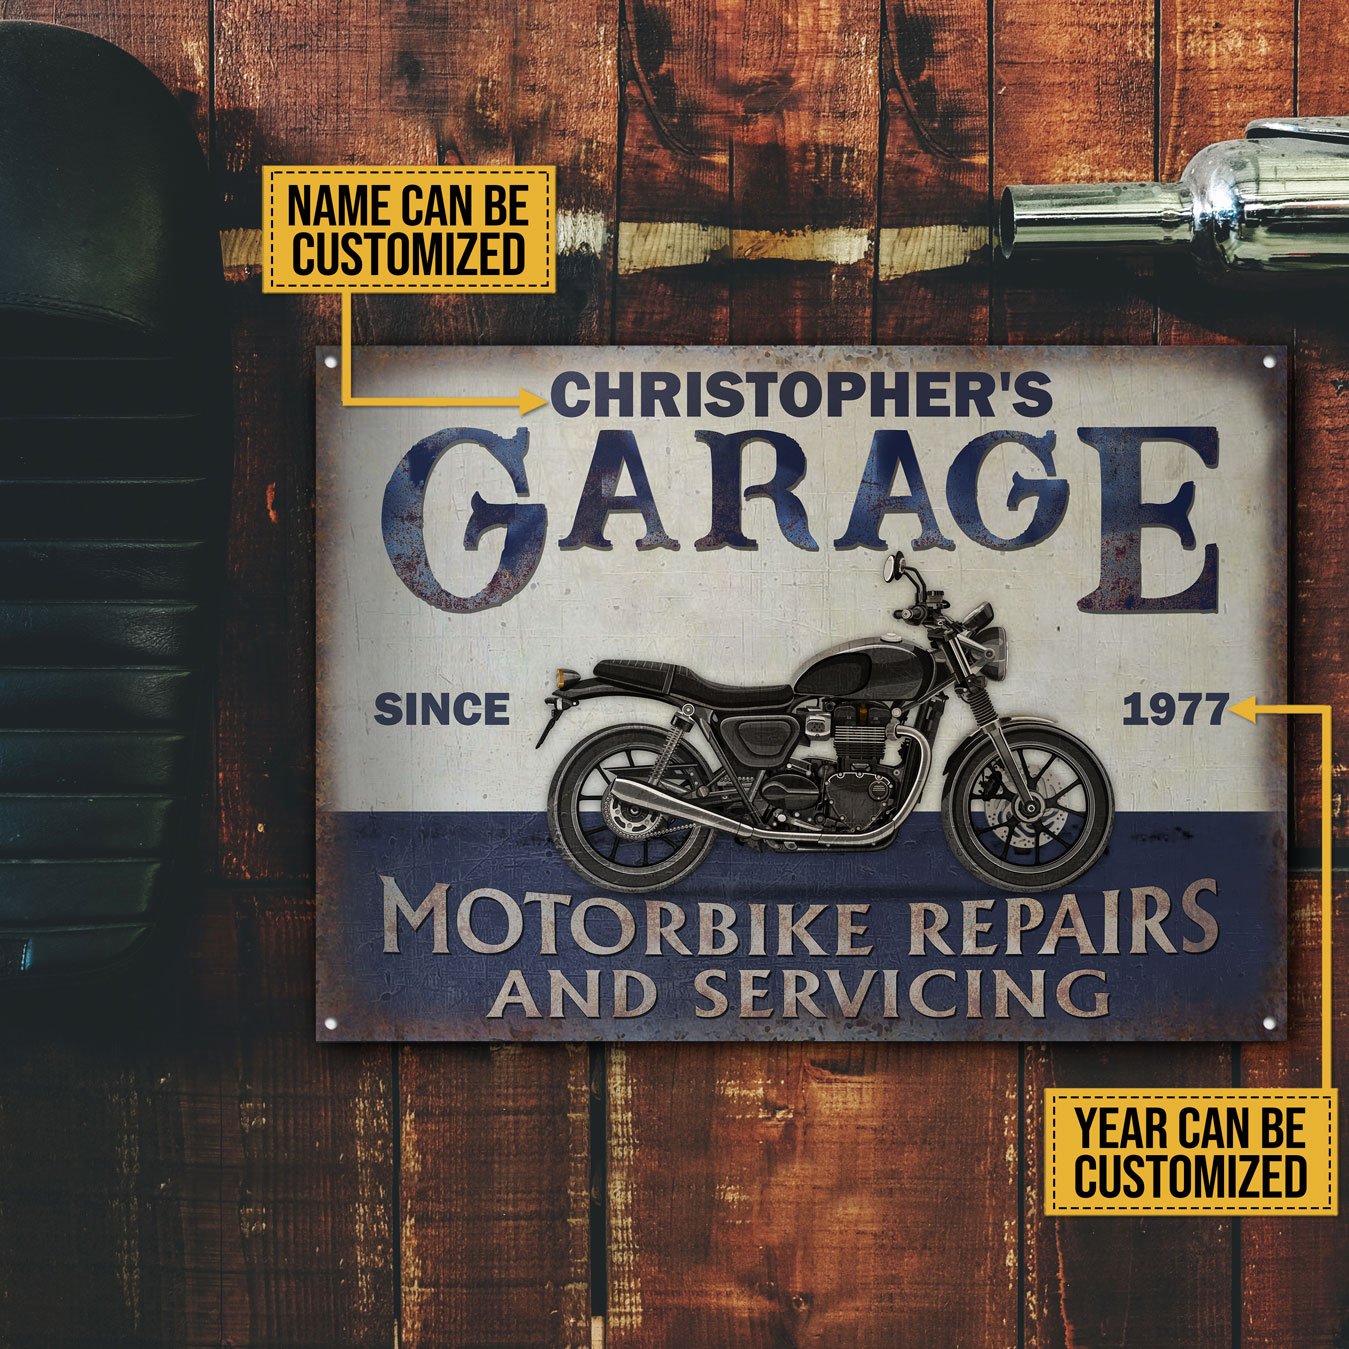 Personalized Motorcycling Garage Repairs Customized Classic Metal Signs